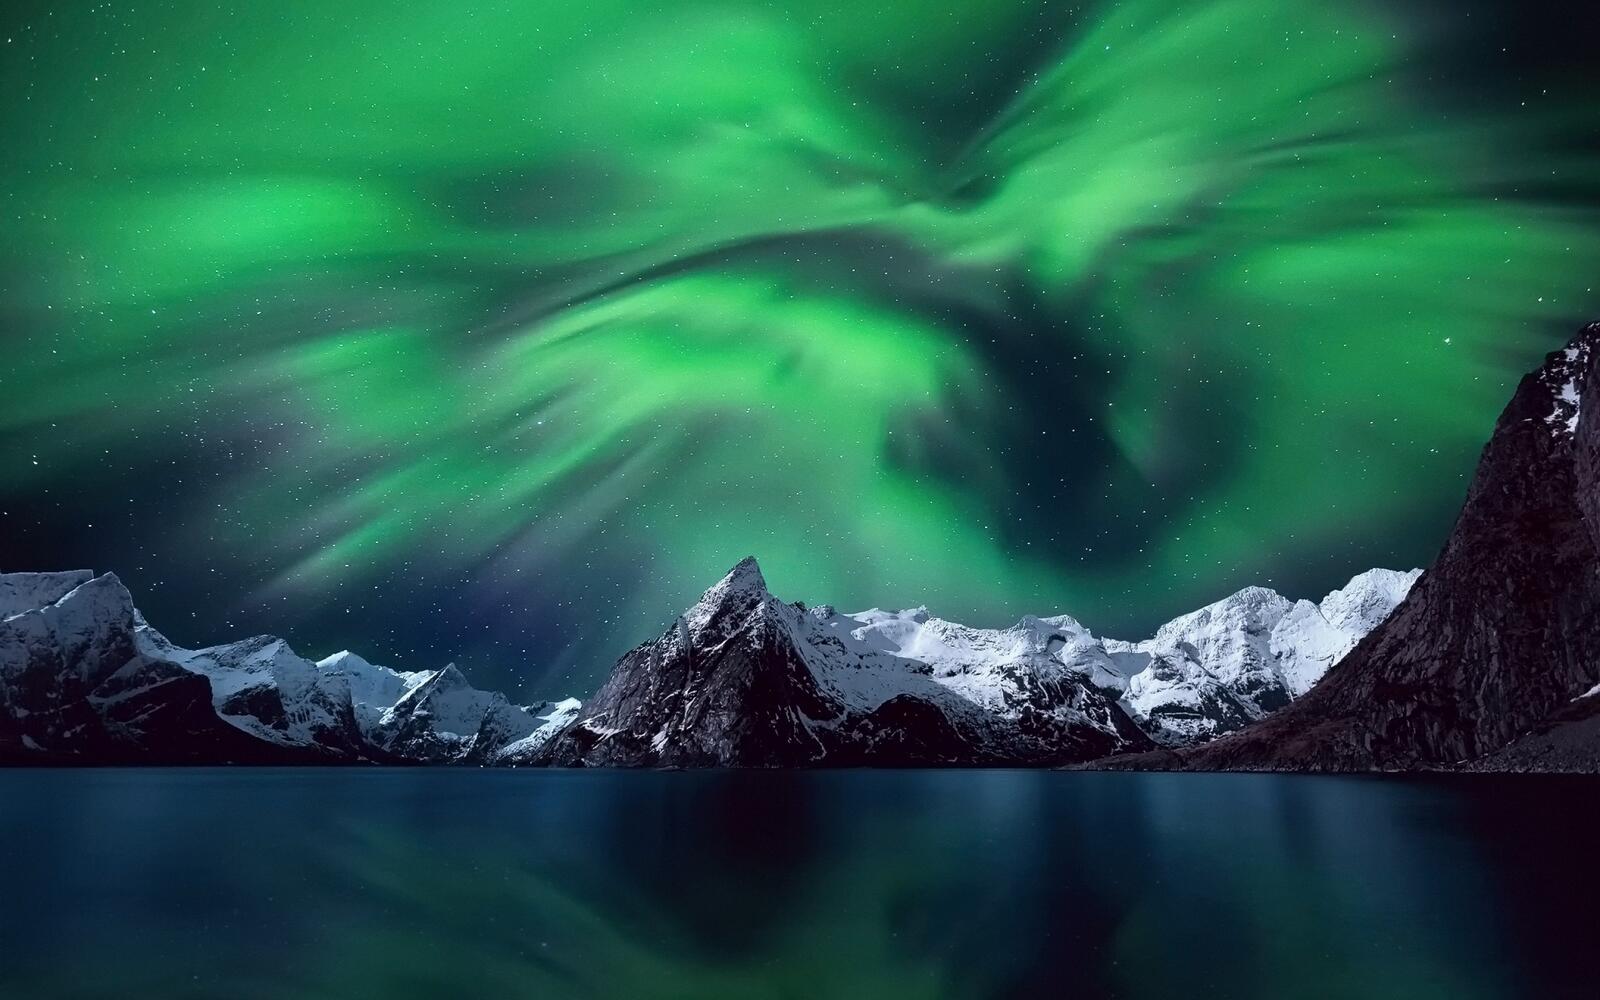 Free photo Wallpaper with the northern lights over a large lake